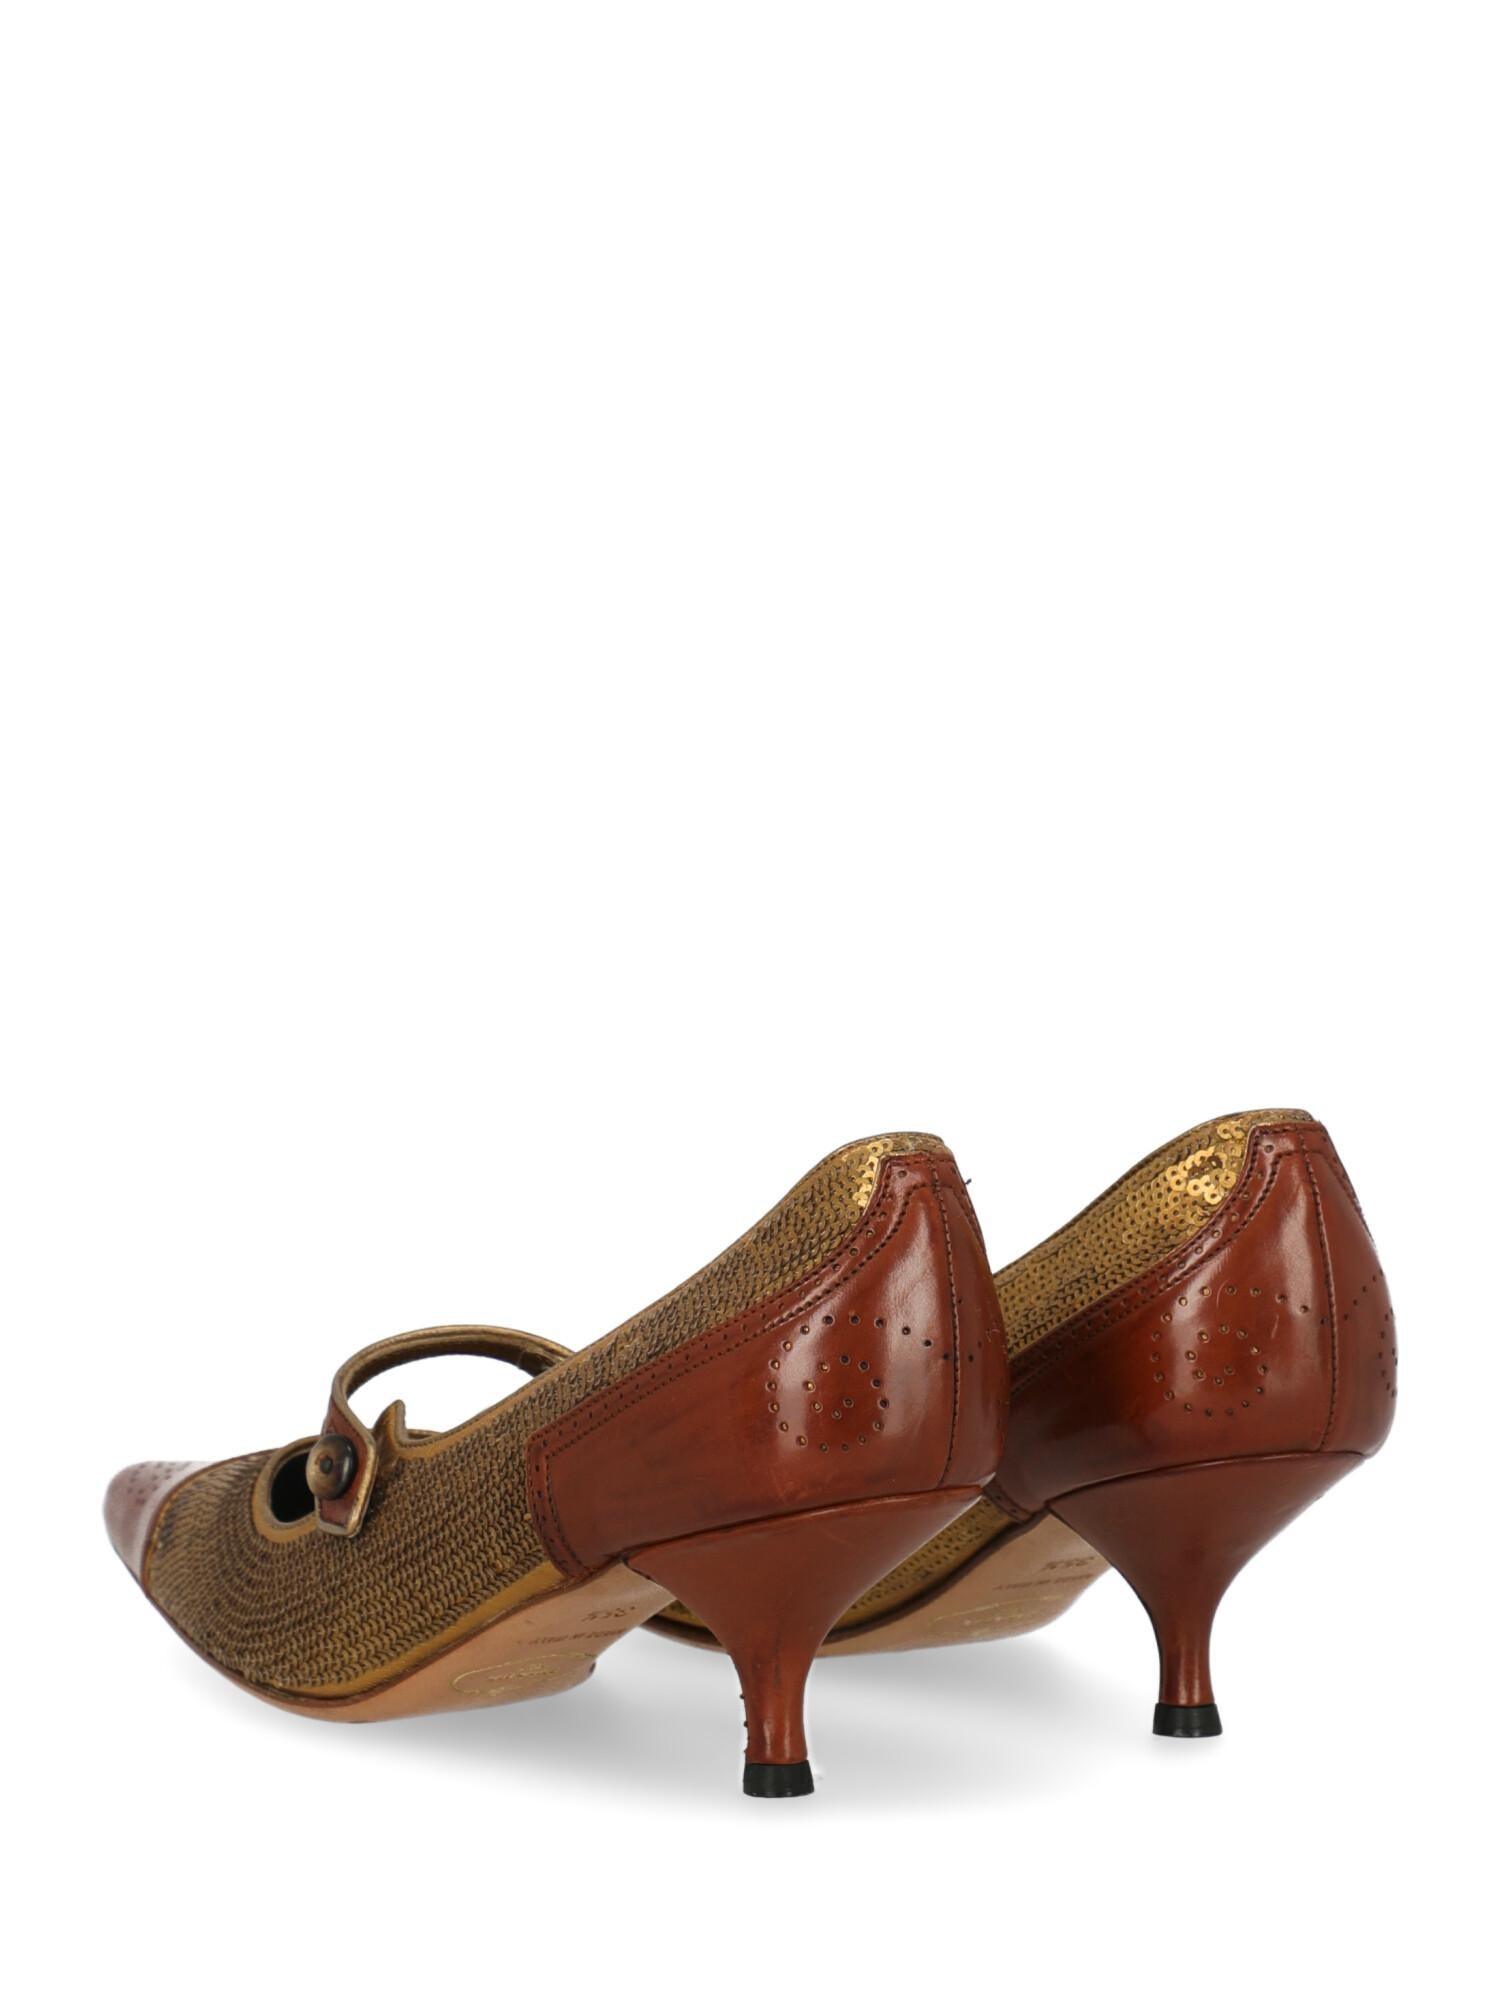 Women's Prada Woman Pumps Brown Leather IT 35.5 For Sale